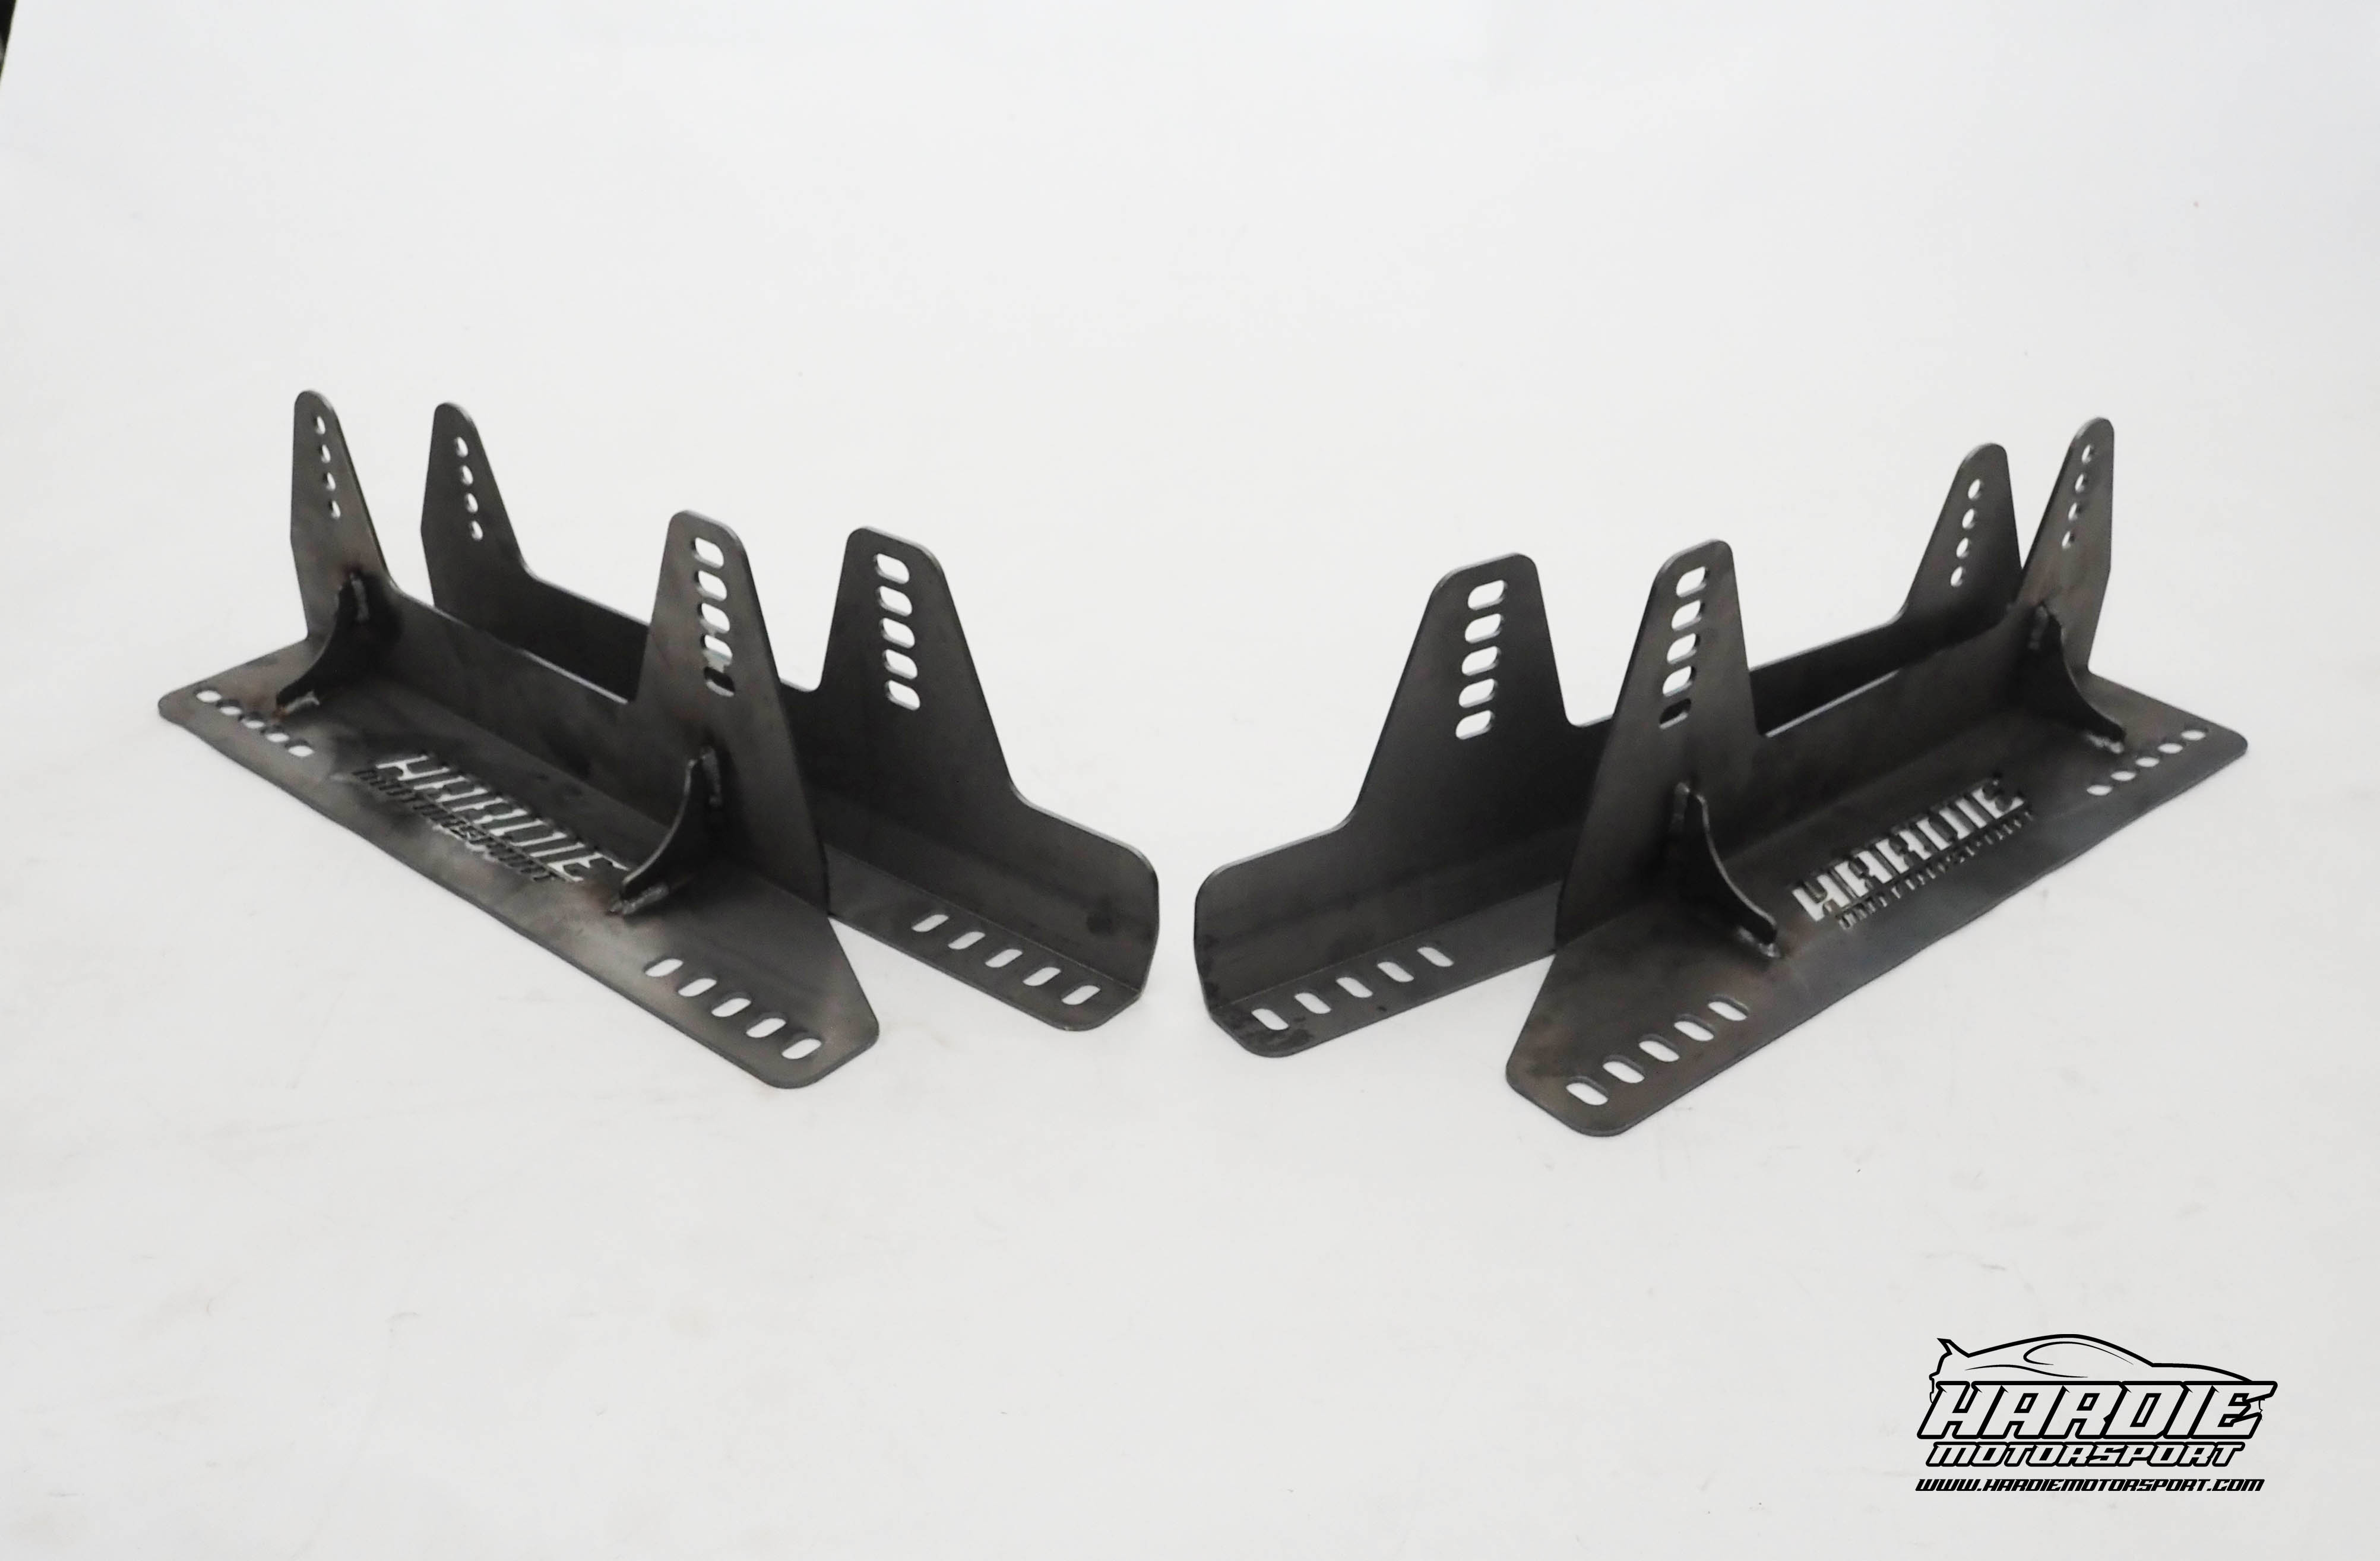 Seat mounts to suit - BMW Drift Cars - E36, 46, z4.<br />
<br />
Available as a set, or as driver side or passenger side.